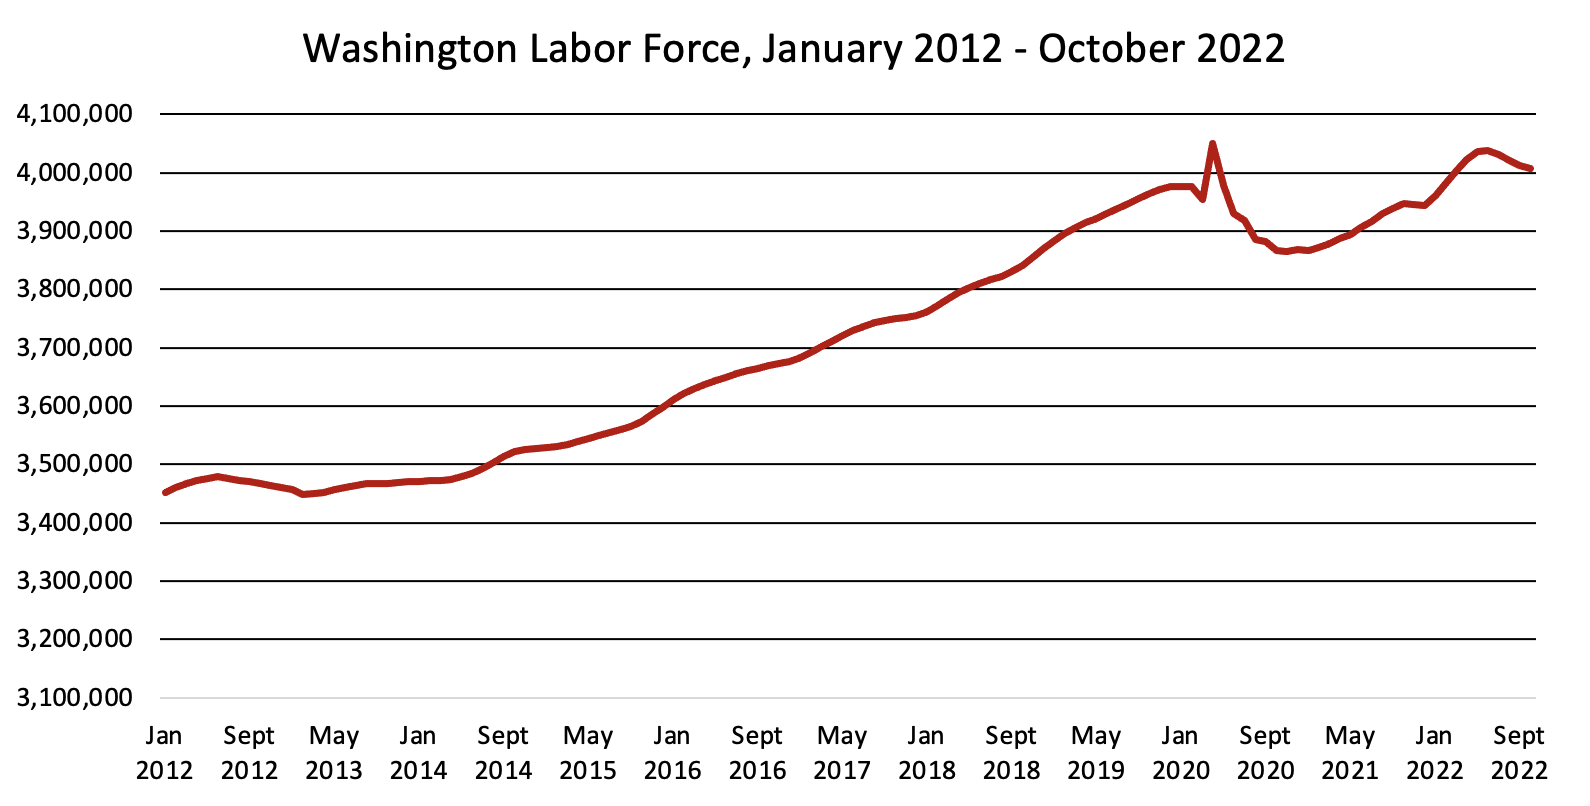 WA labor force, January 2012 to October 2022